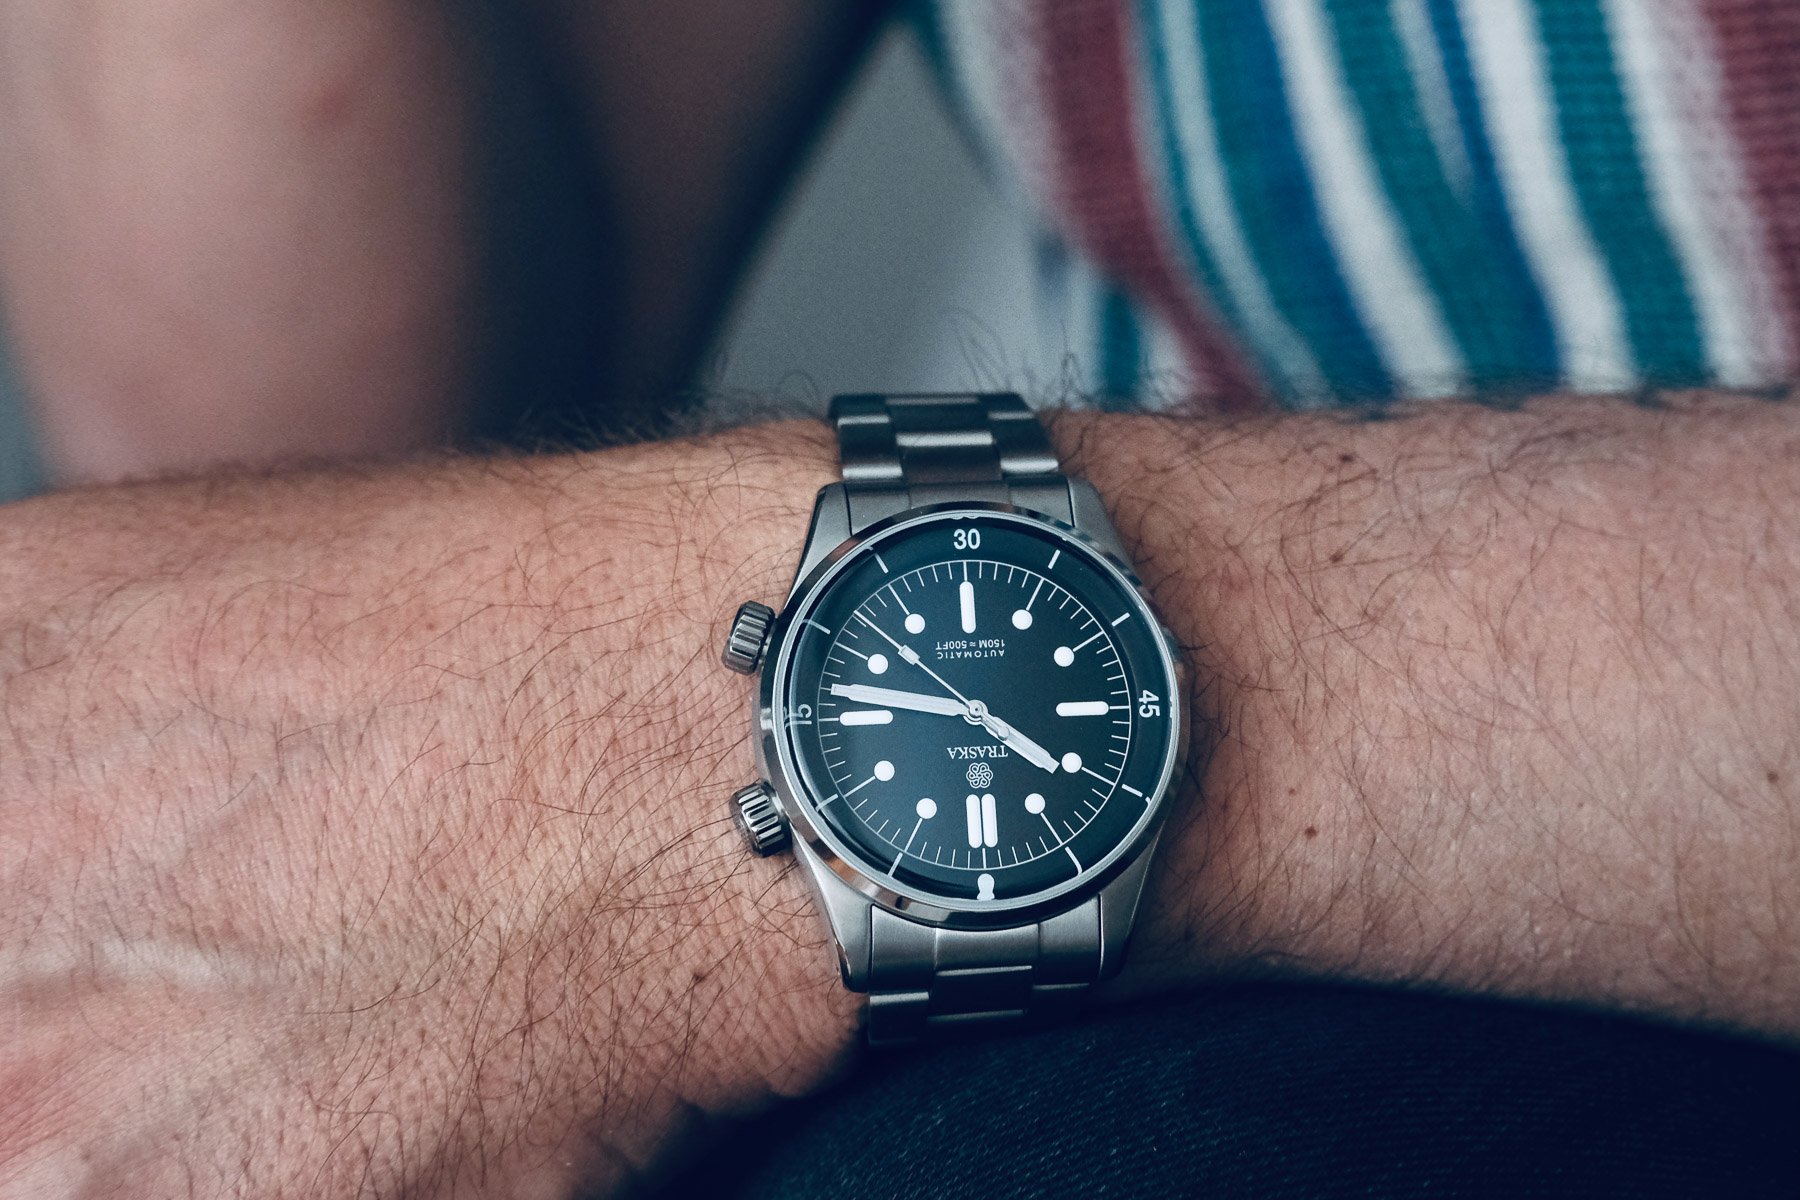 【F】 A Hands-On Look At the Traska Seafarer